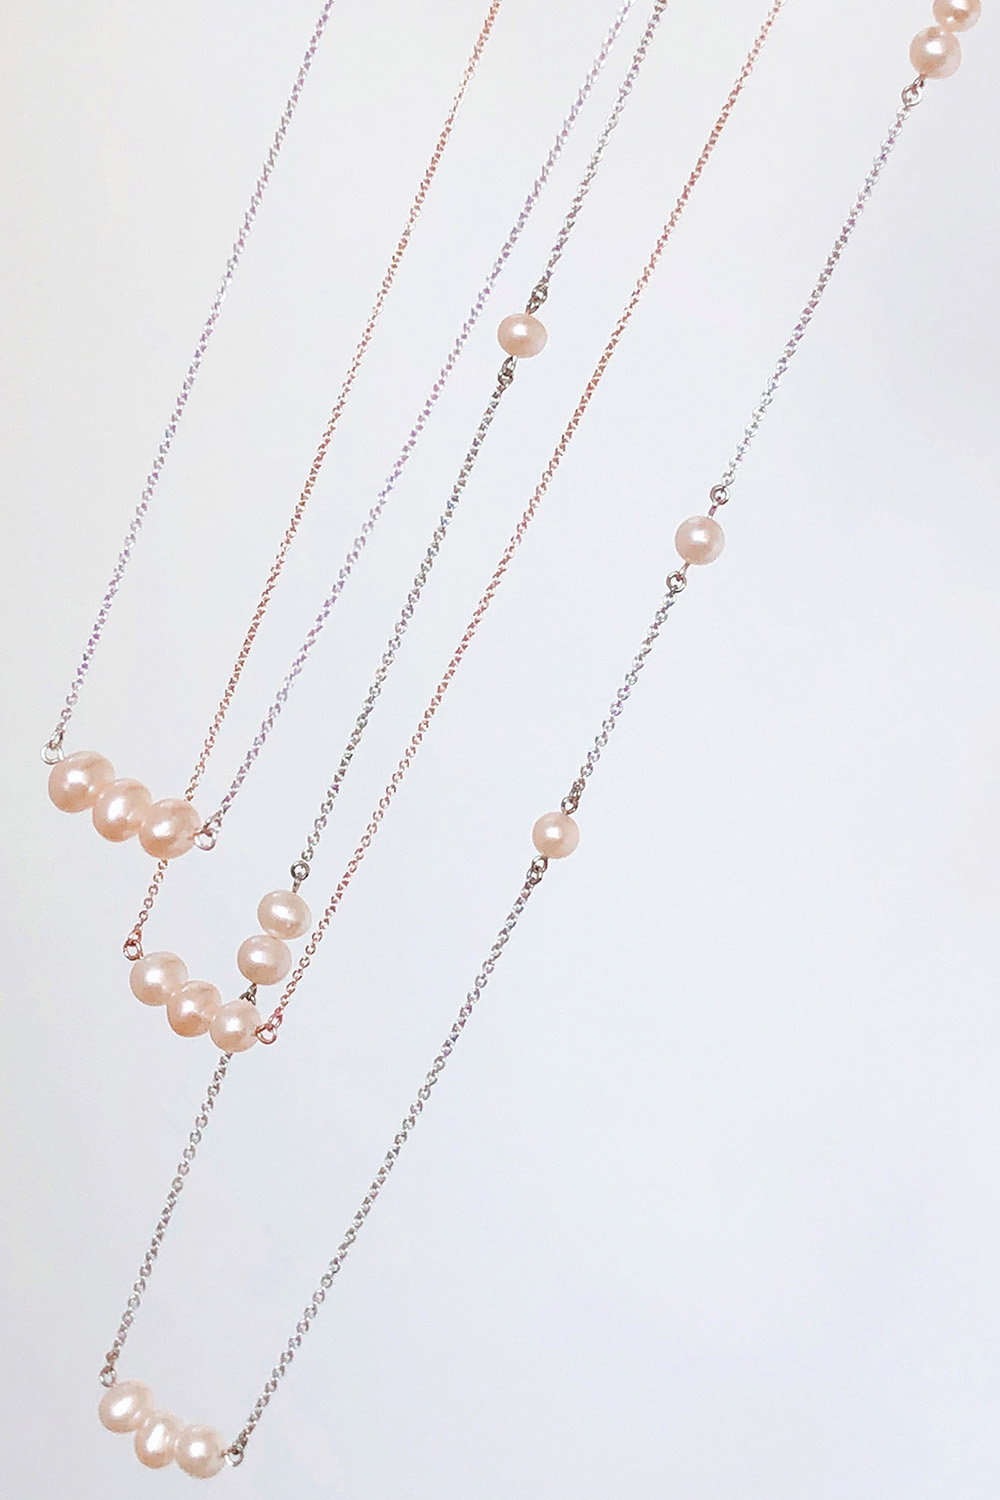 White gold and rose gold pearl necklaces